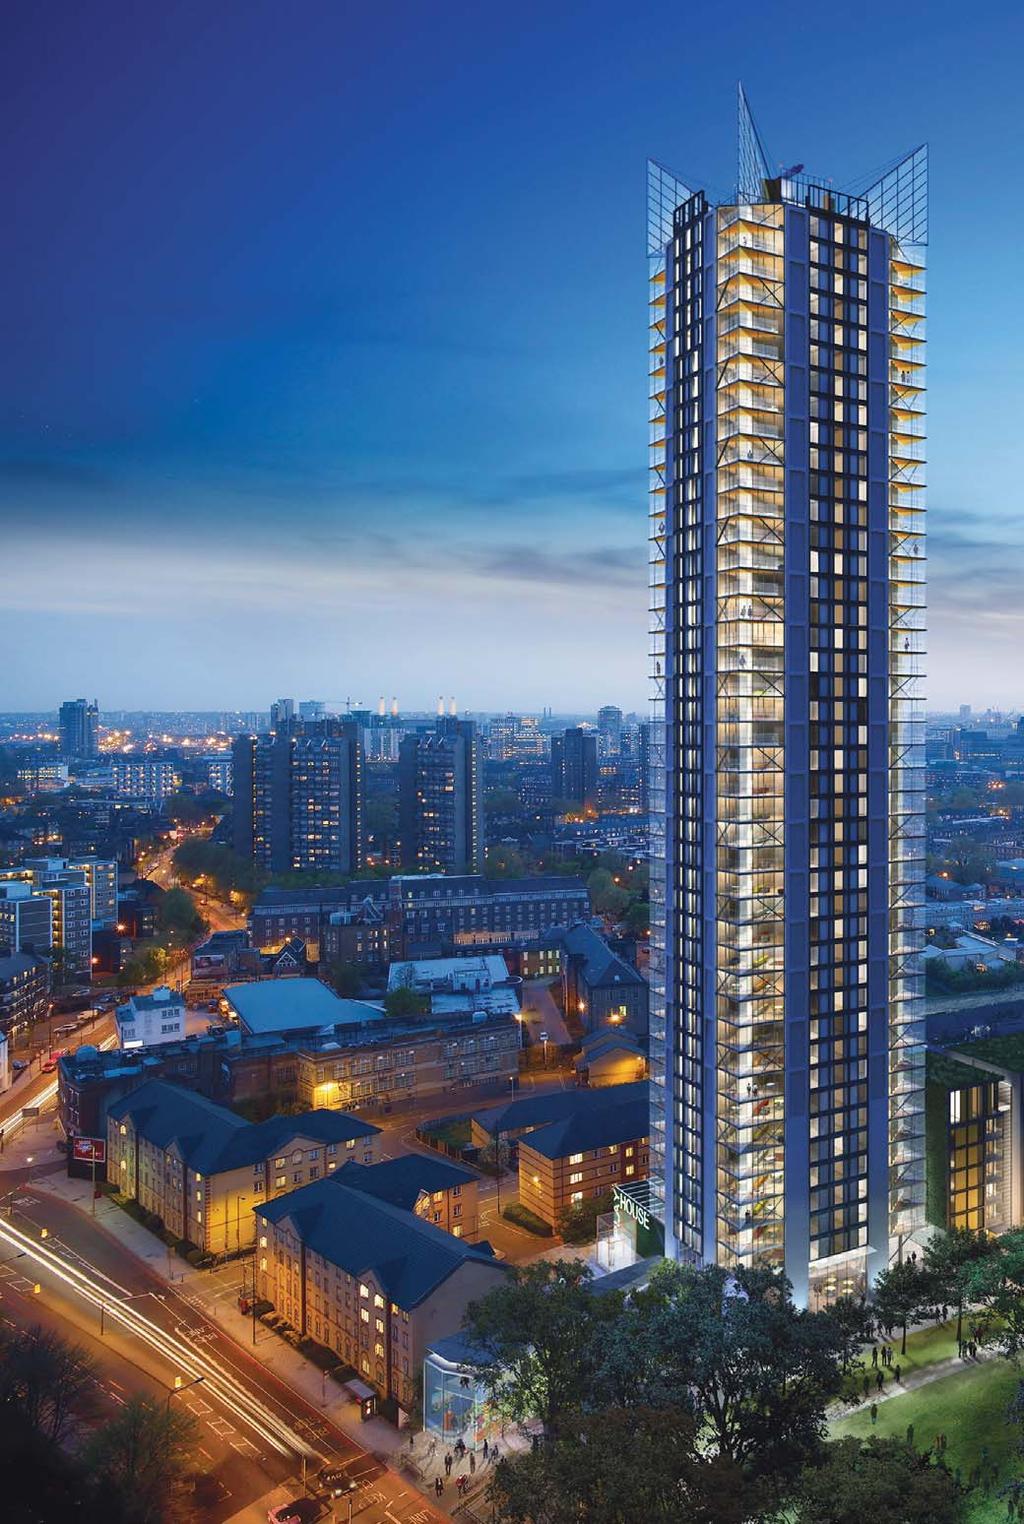 11 Build to Rent - London 360, London Acted on behalf of Essential Living, who were selected as